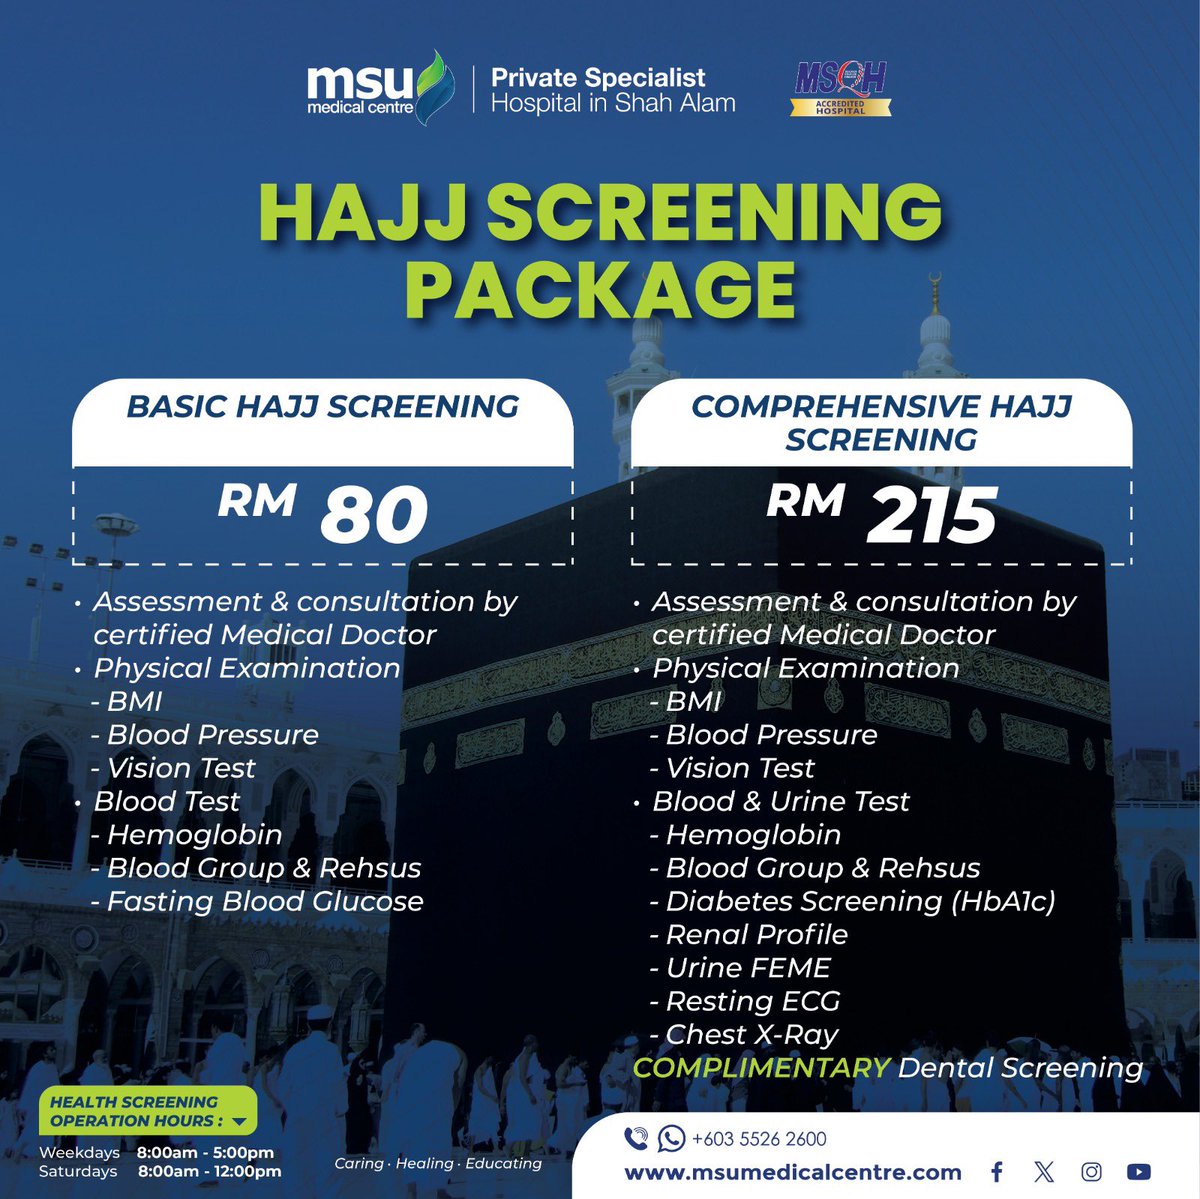 Sign up for Hajj screening package at MSU Medical Centre! Please contact us at 03-55262600 or visit our website at msumedicalcentre.com for further information. #CaringHealingEducating #MSUMC #hajj